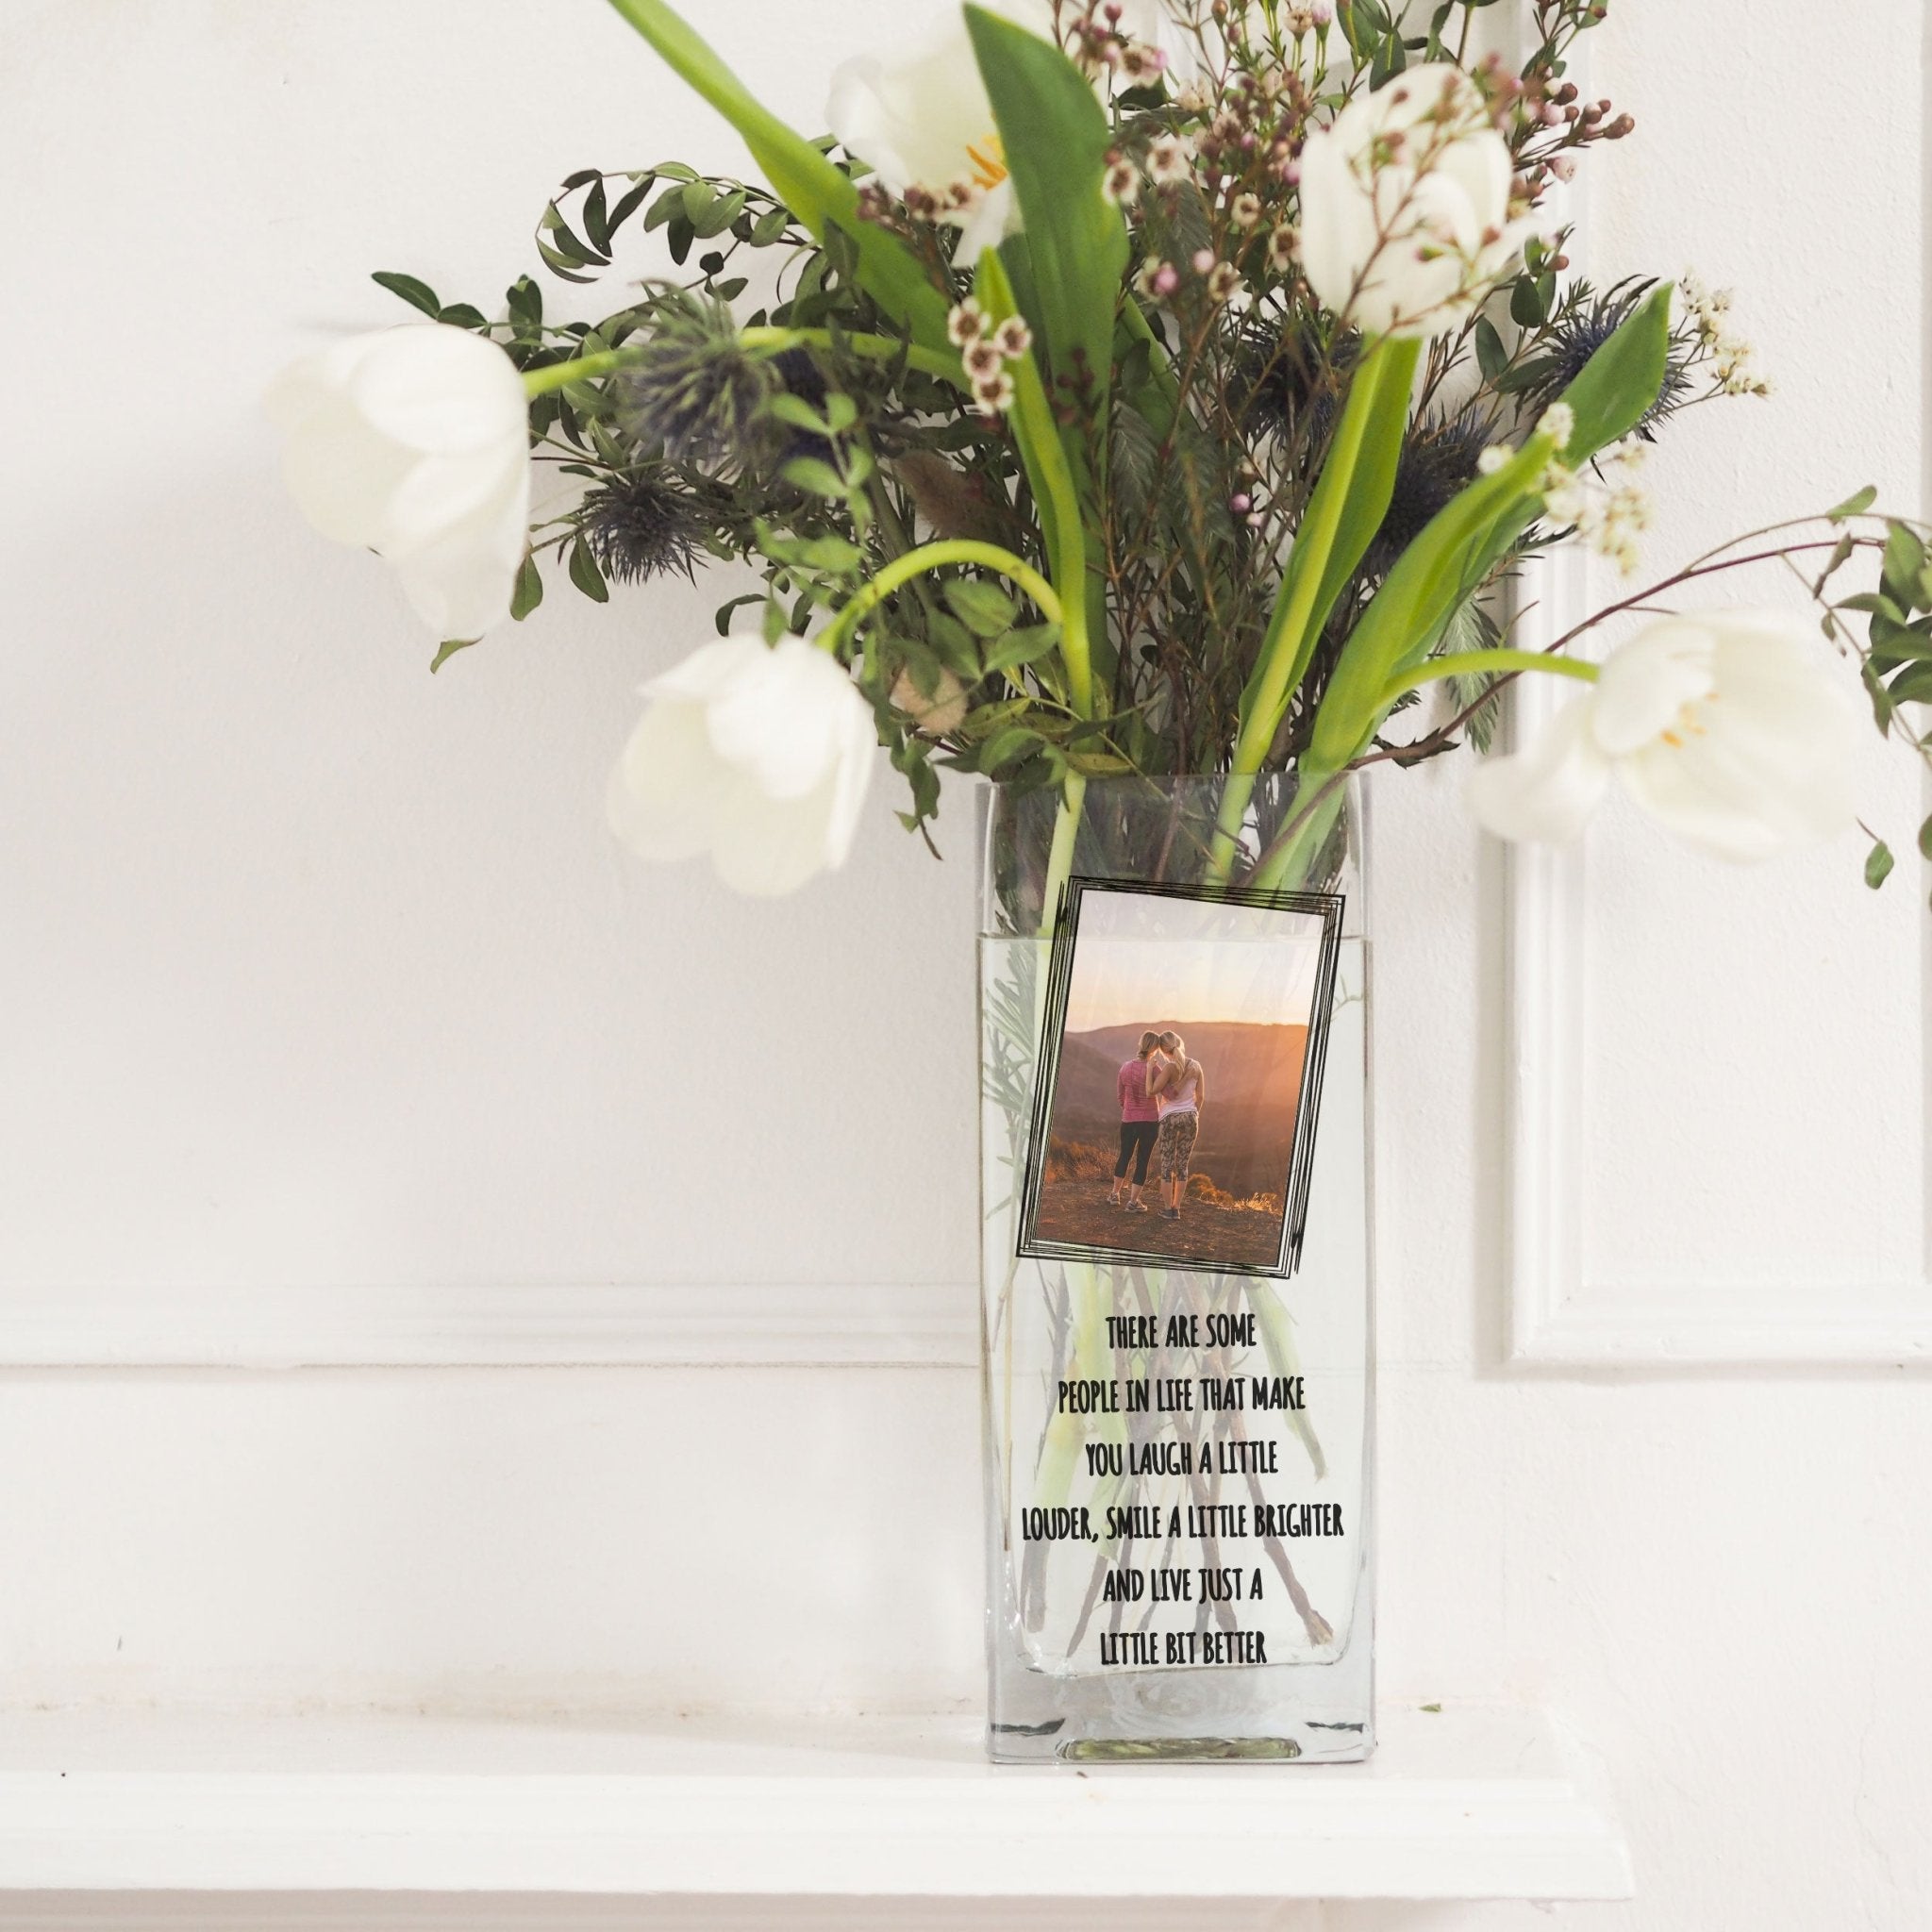 Best Friend Personalised Photo Glass Vase | Friendship Gift Ideas | Custom Texts/Quotes Flower Stand w/ Picture Present | Crystal Home Decor Vase - Unique Prints